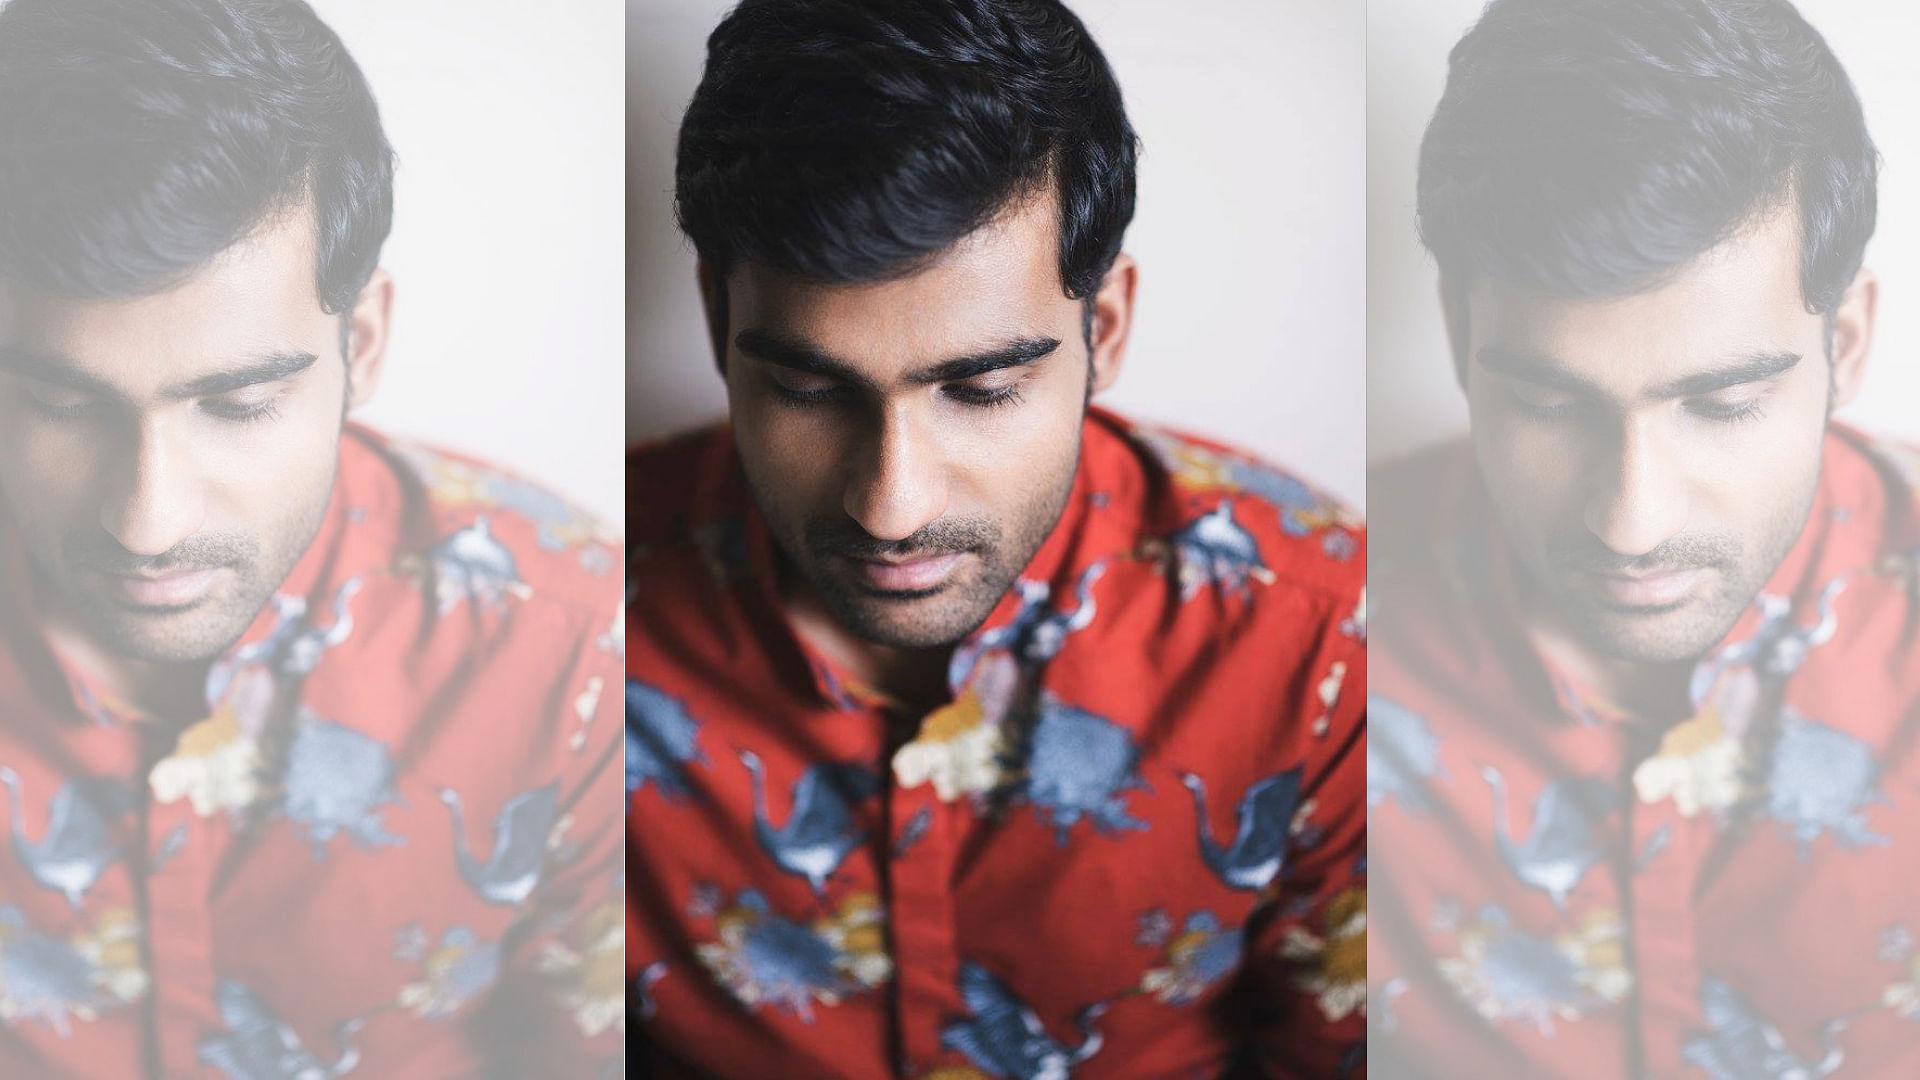 India’s indie music sensation Prateek Kuhad’s popularity is growing by the day.